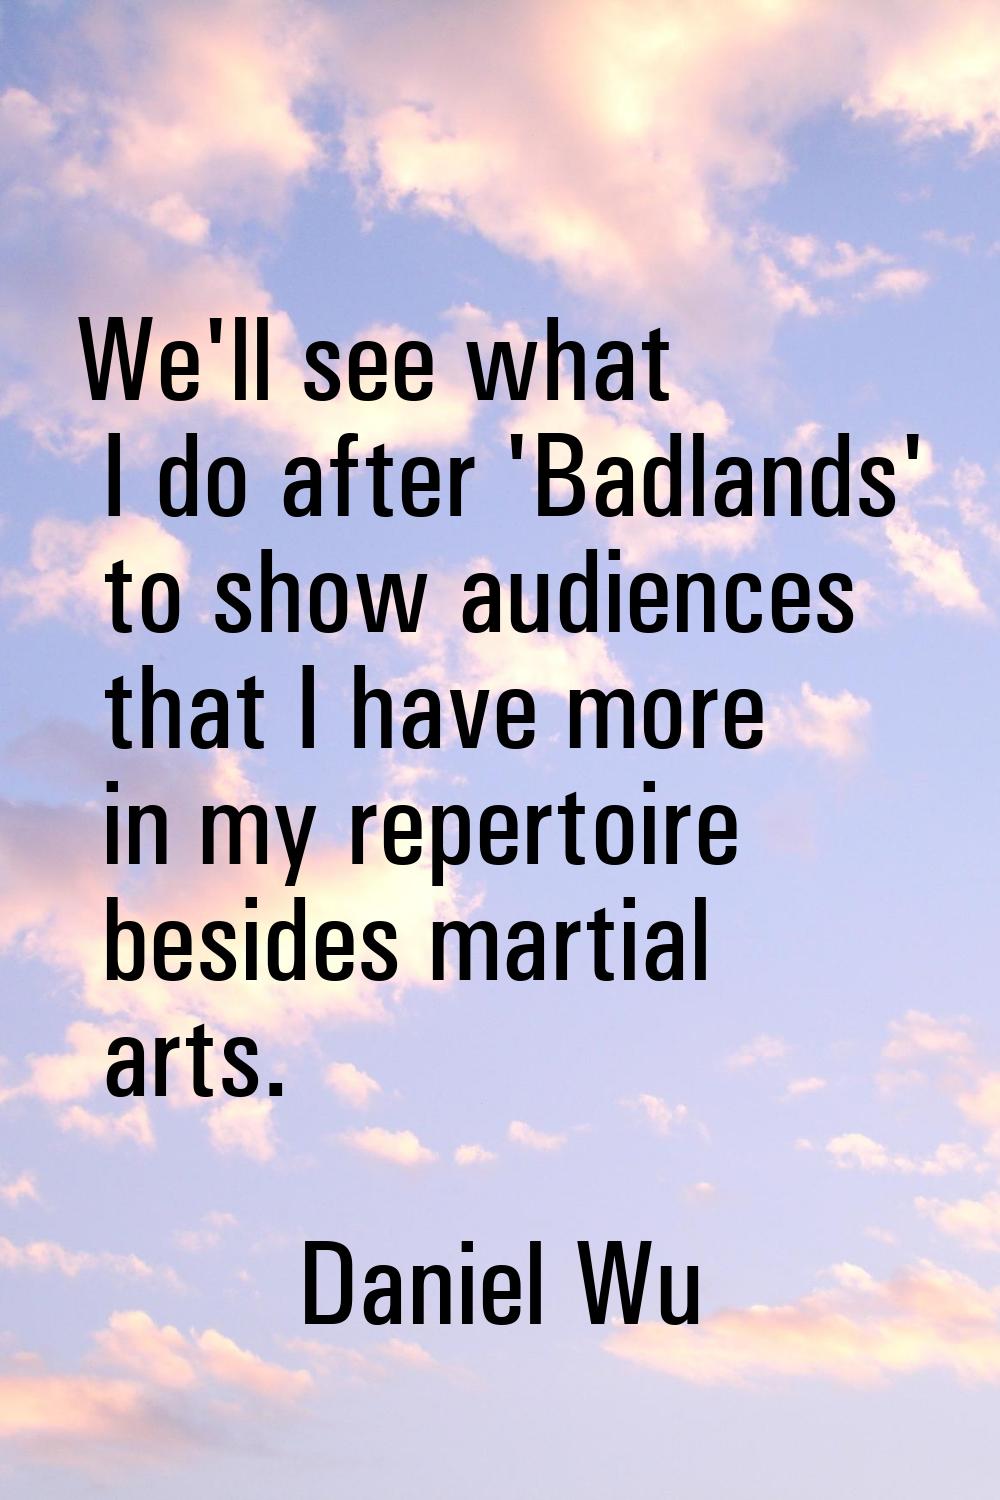 We'll see what I do after 'Badlands' to show audiences that I have more in my repertoire besides ma